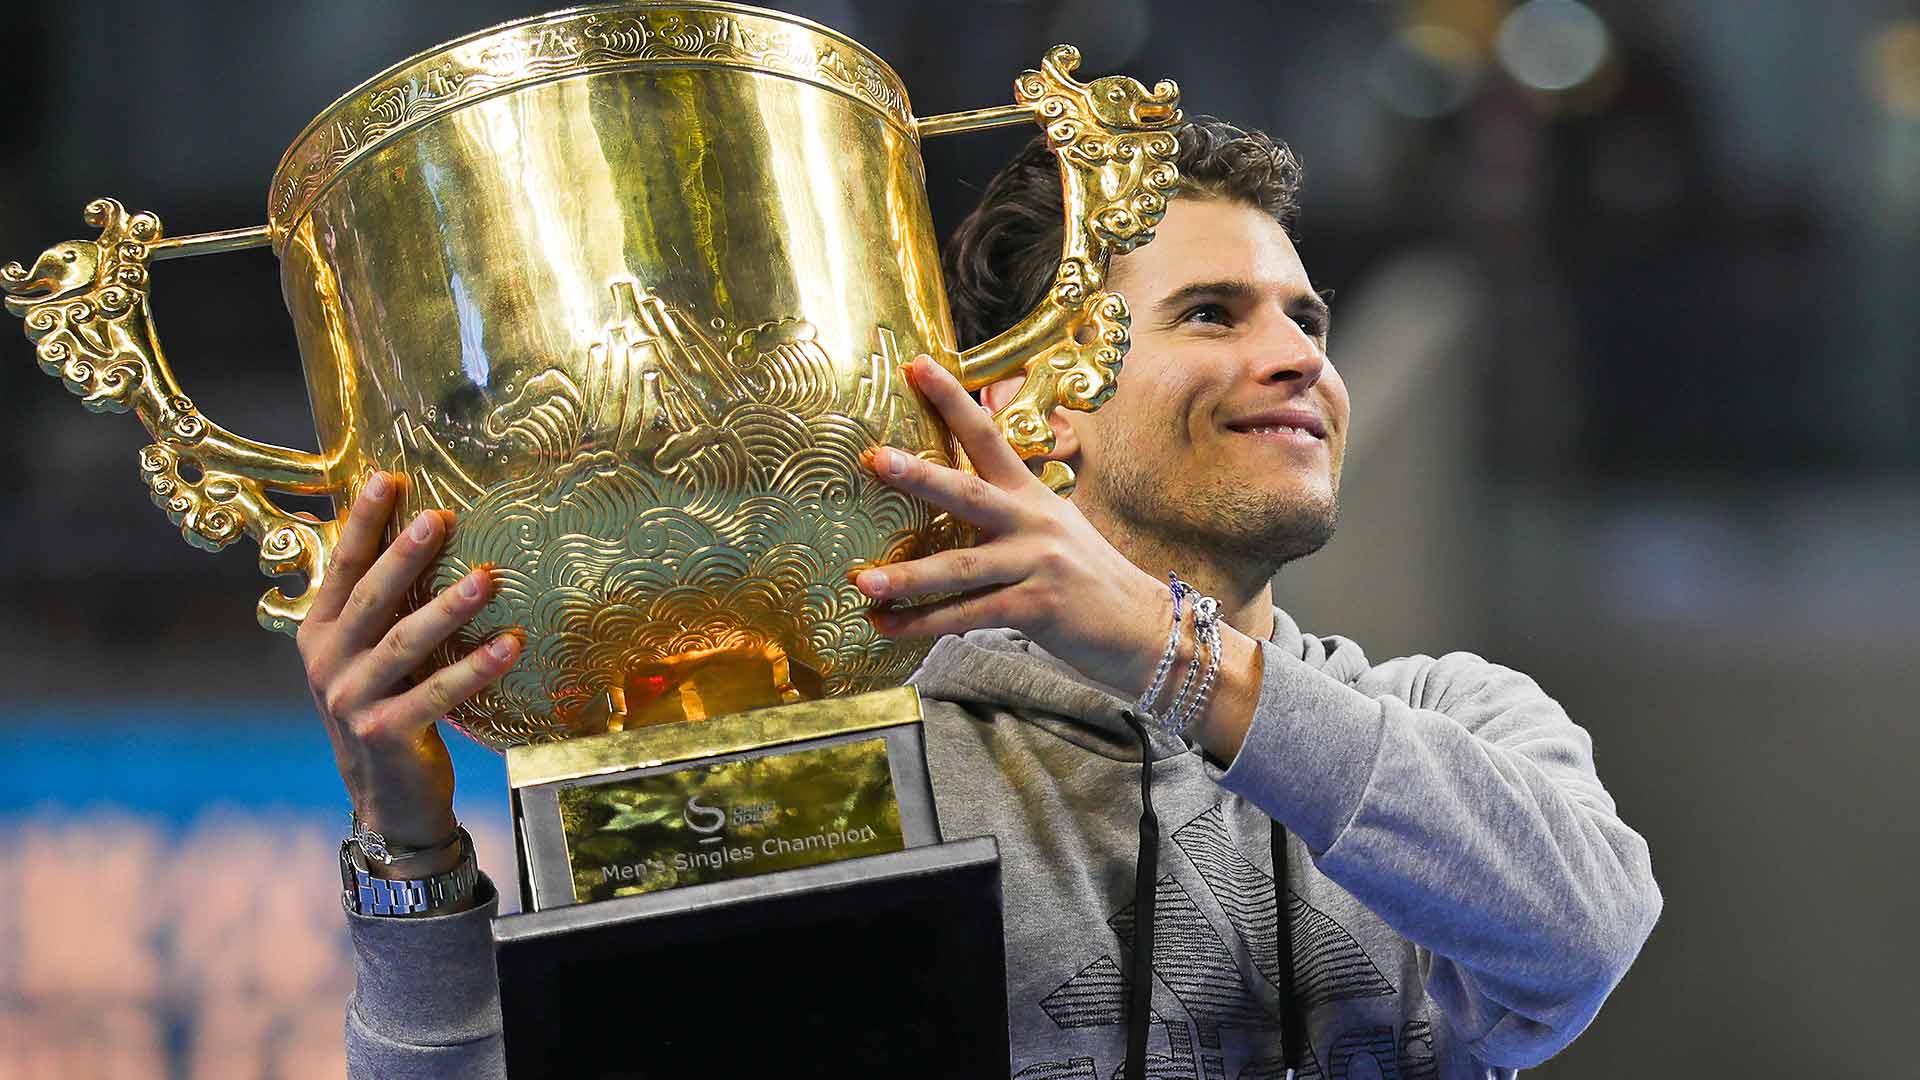 Dominic Thiem wins his second hard-court title of the season on Sunday at the China Open in Beijing.